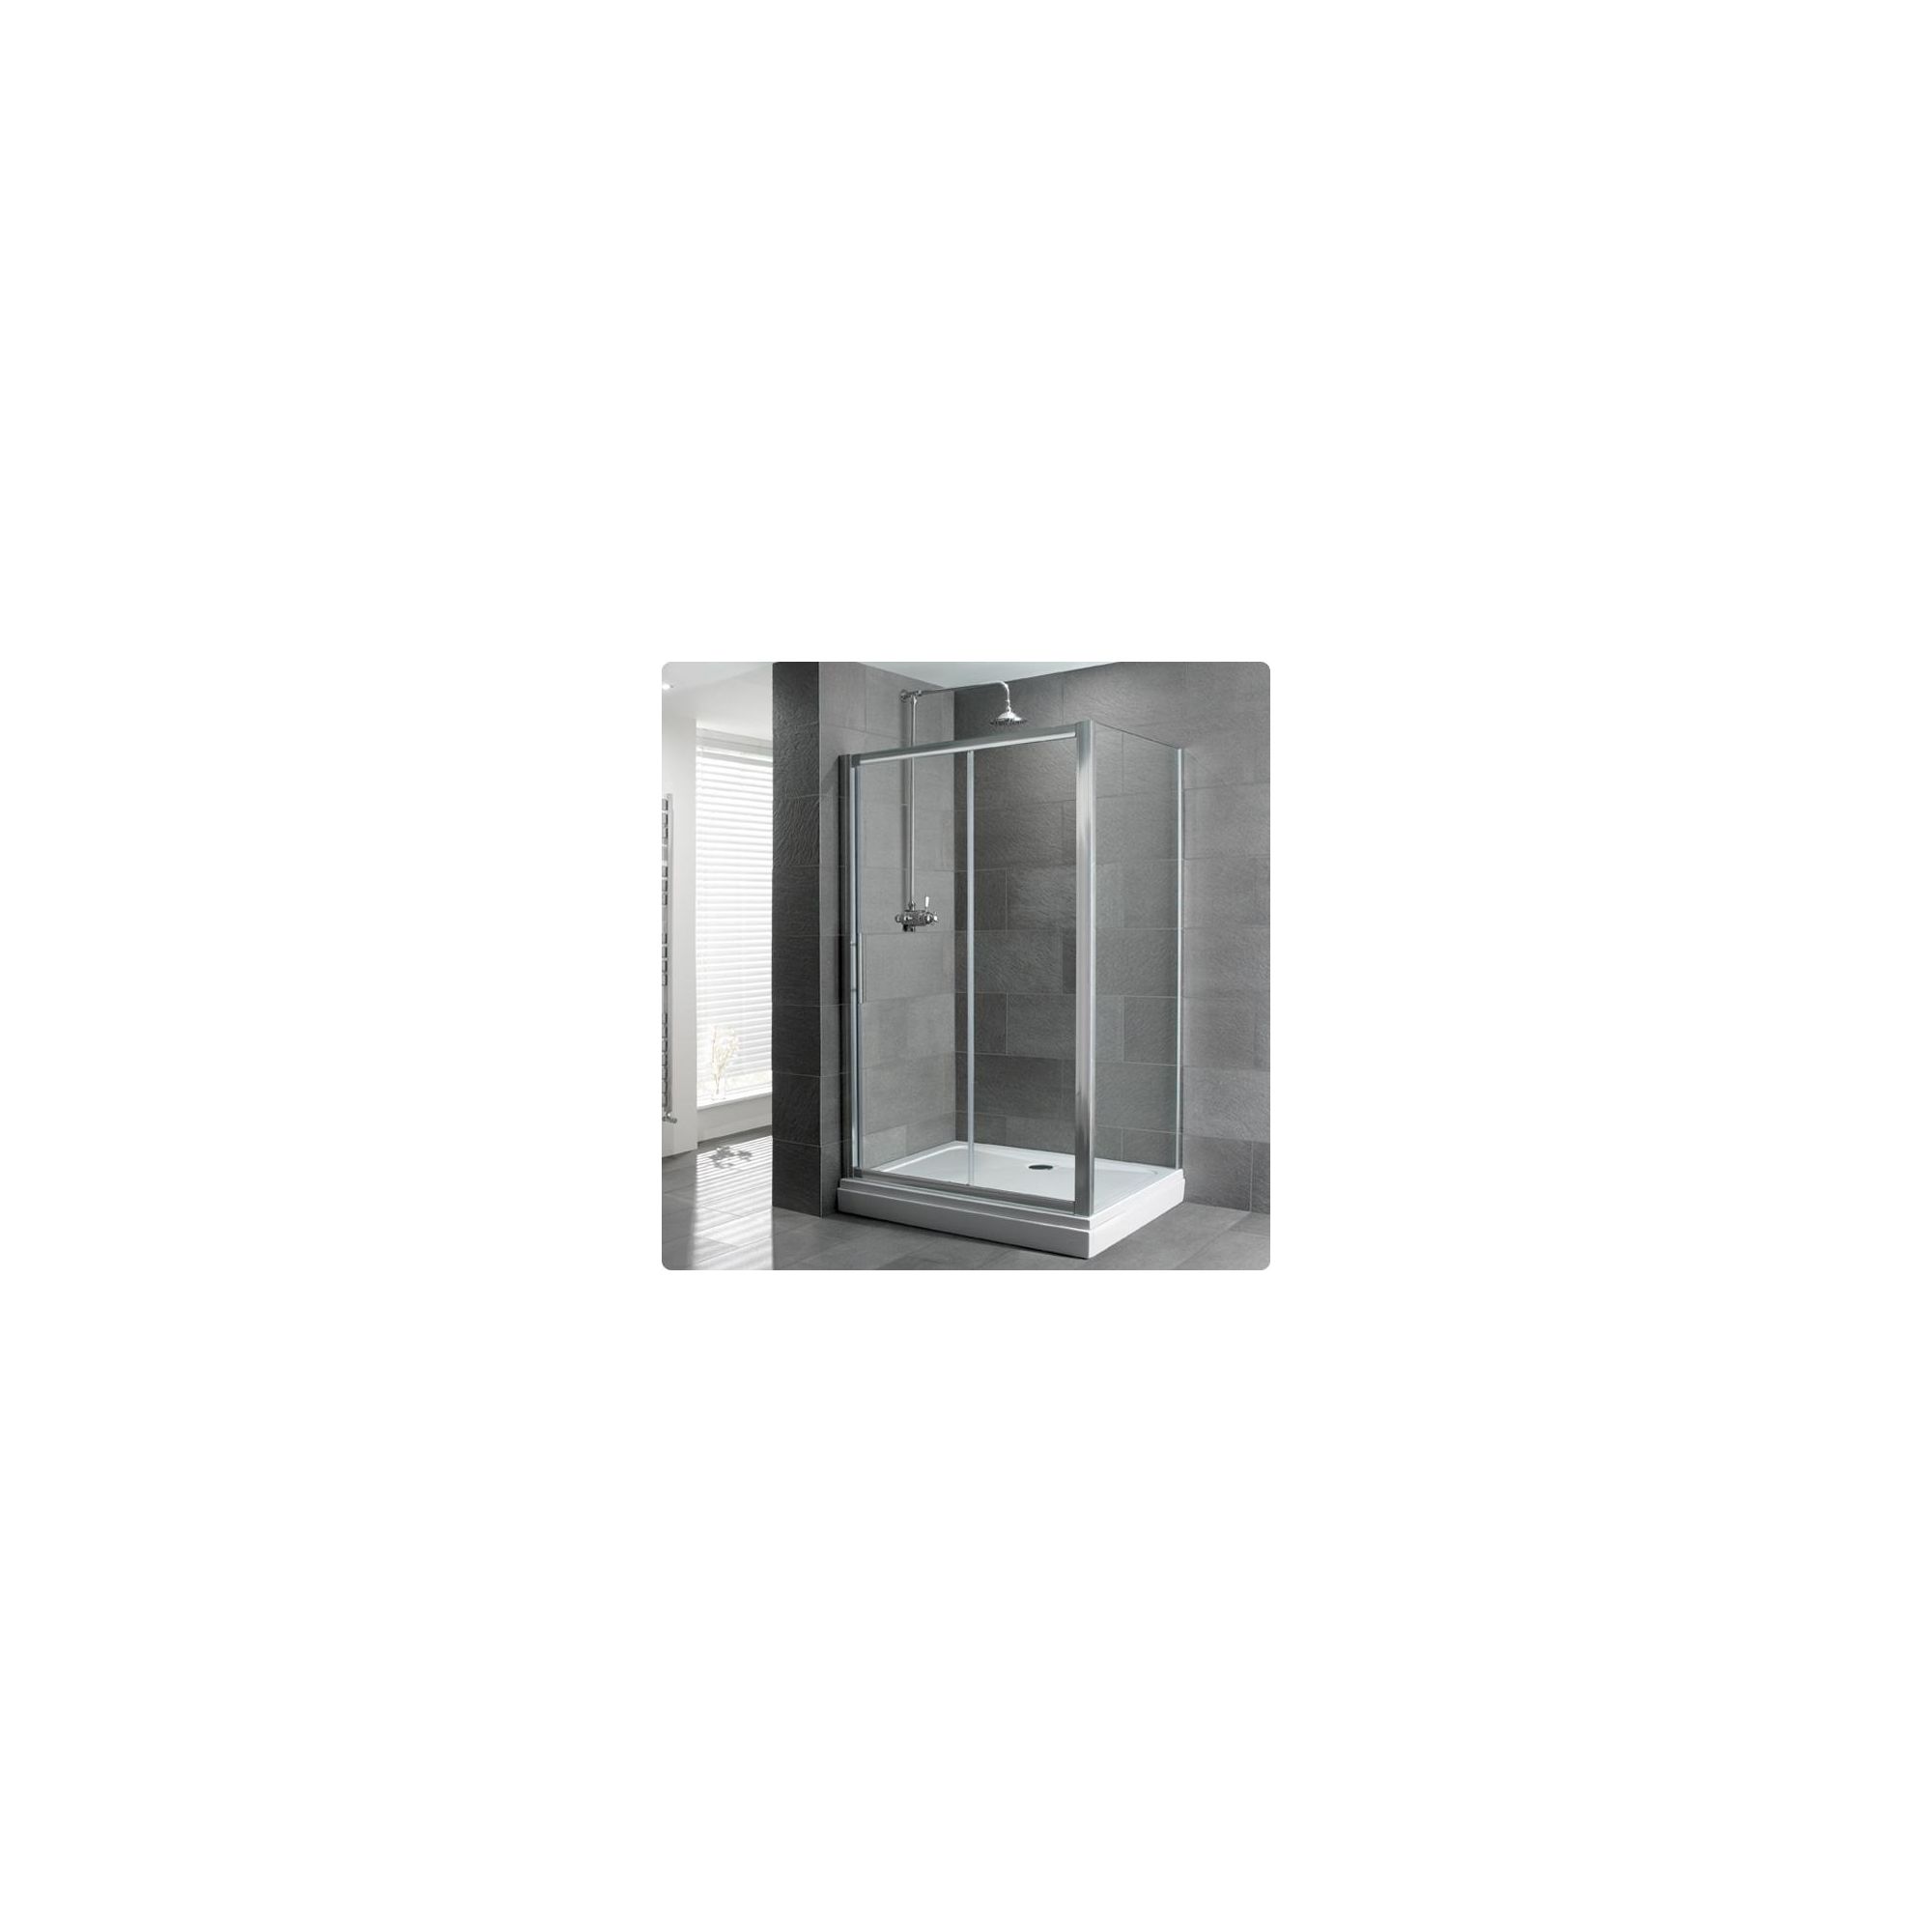 Duchy Select Silver Single Sliding Door Shower Enclosure, 1100mm x 800mm, Standard Tray, 6mm Glass at Tesco Direct